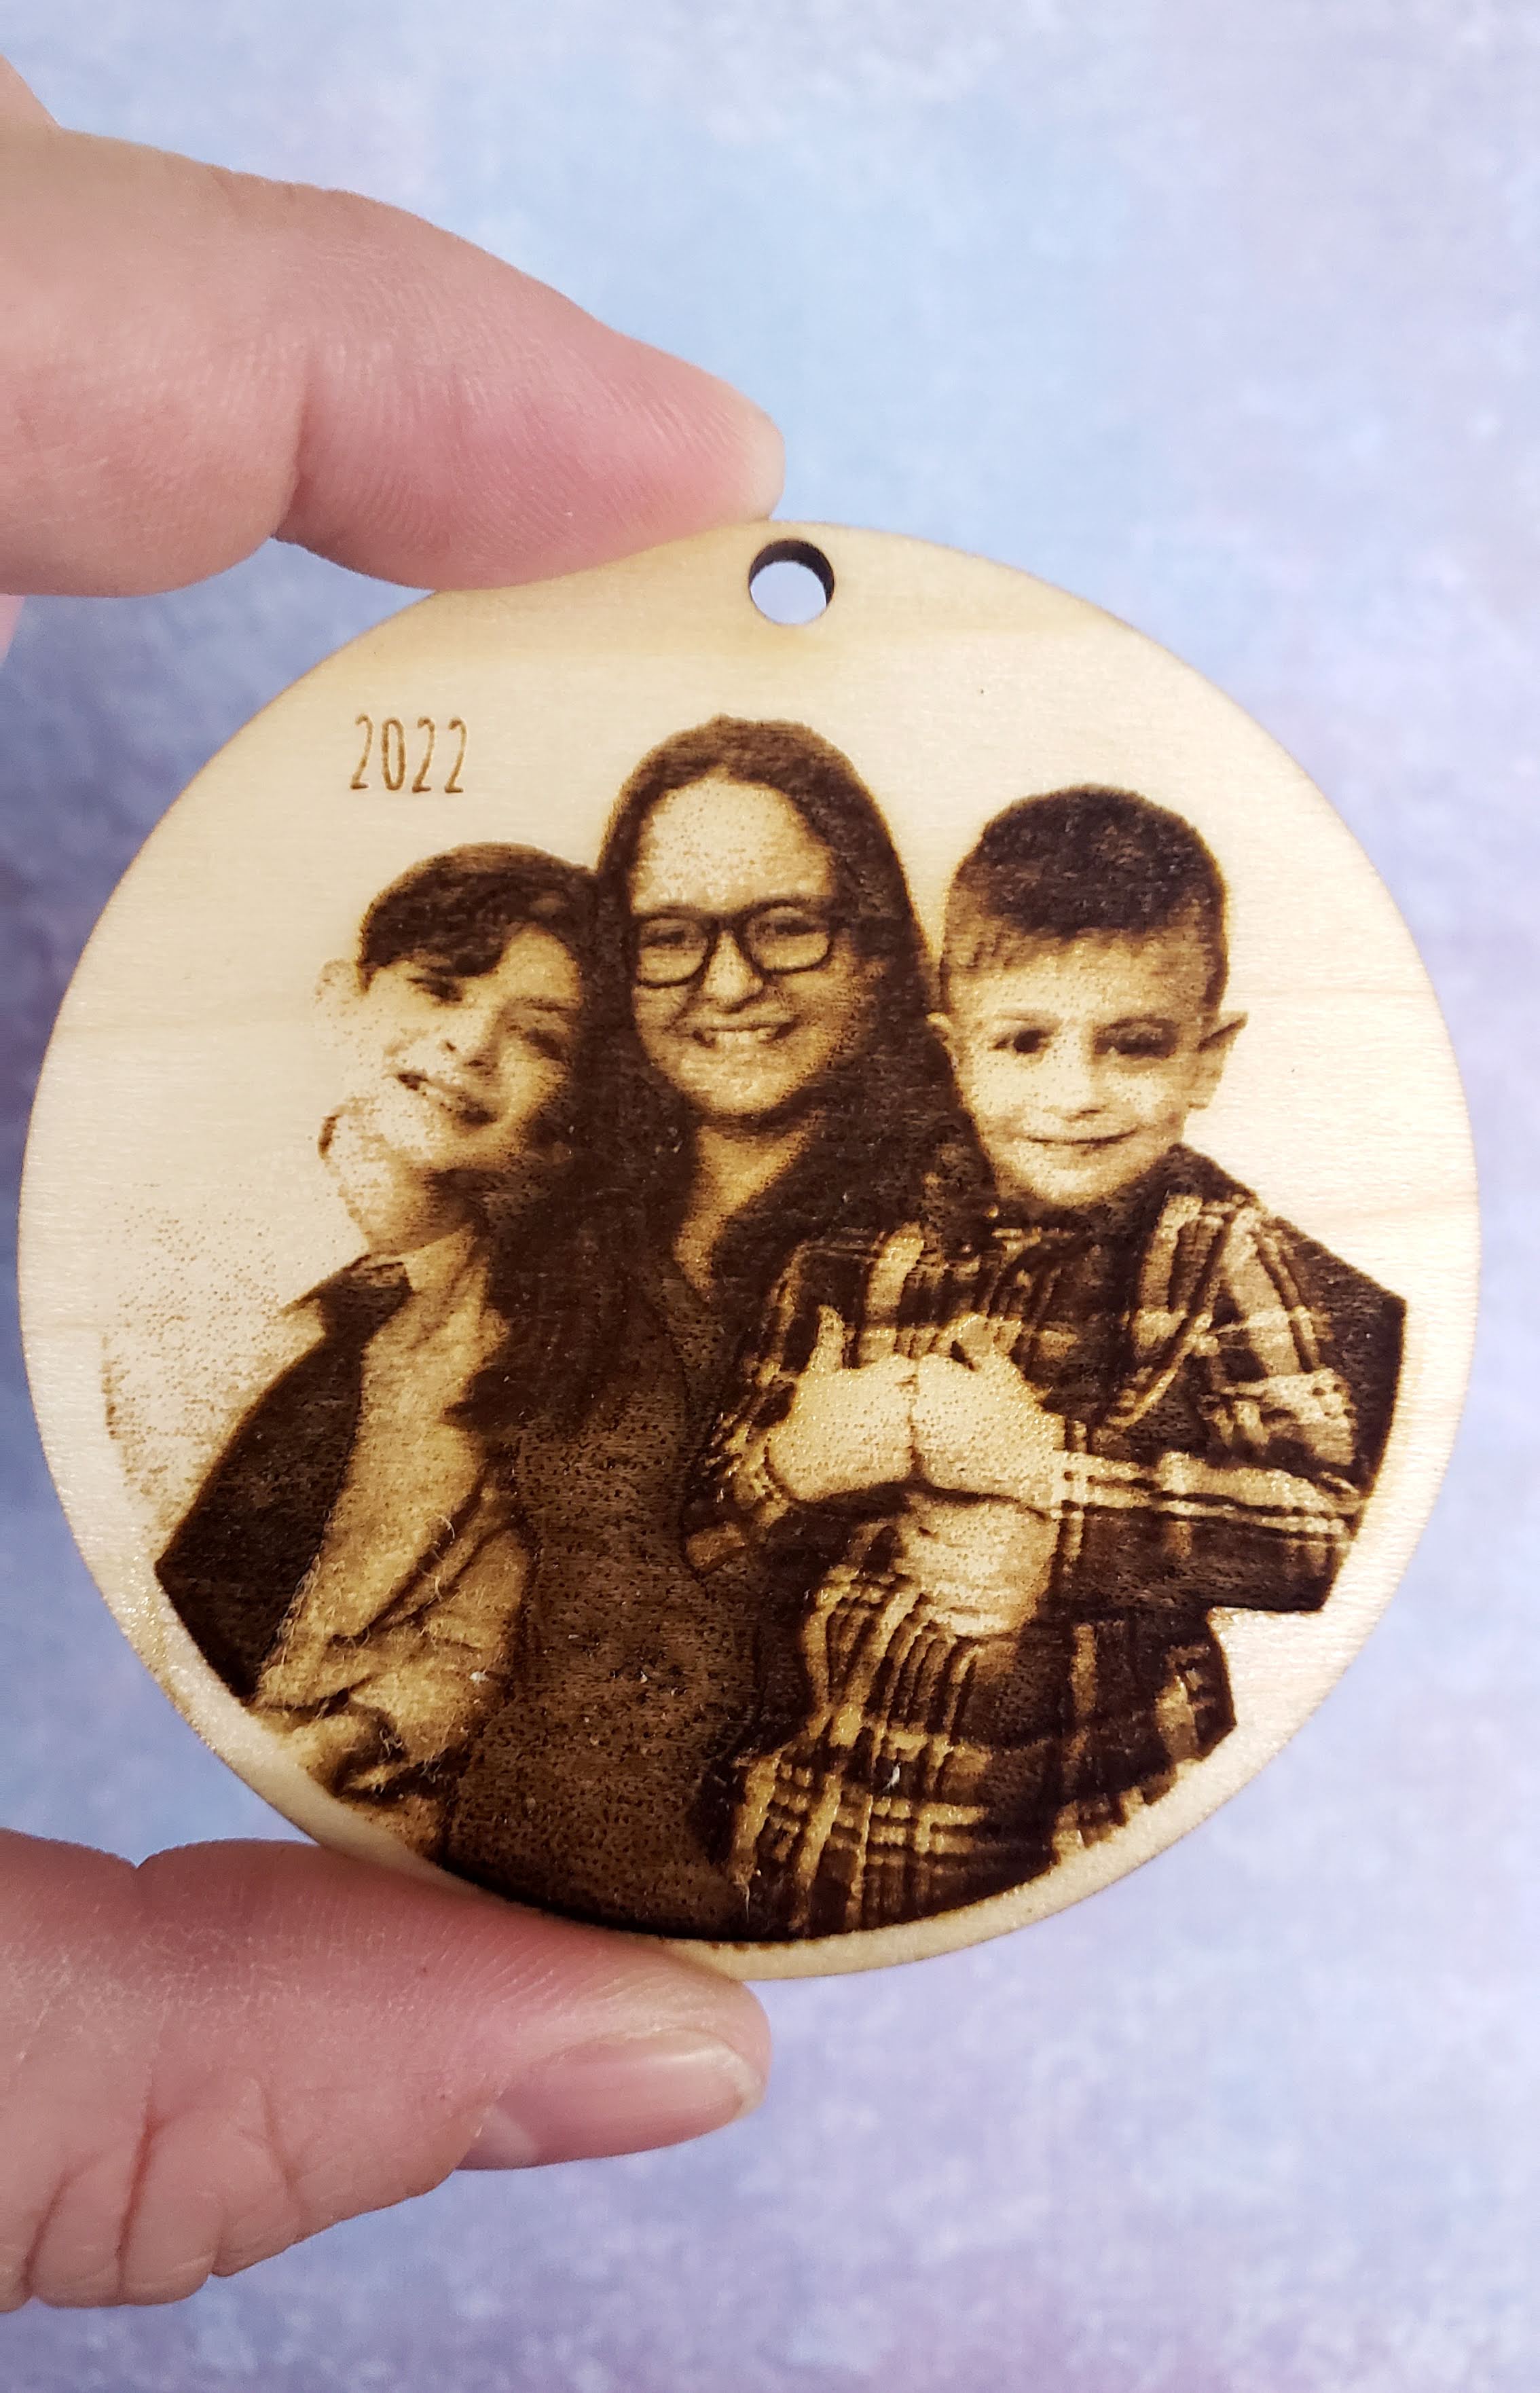 mom with 2 boys photograph engraved on wood with text reading 2022